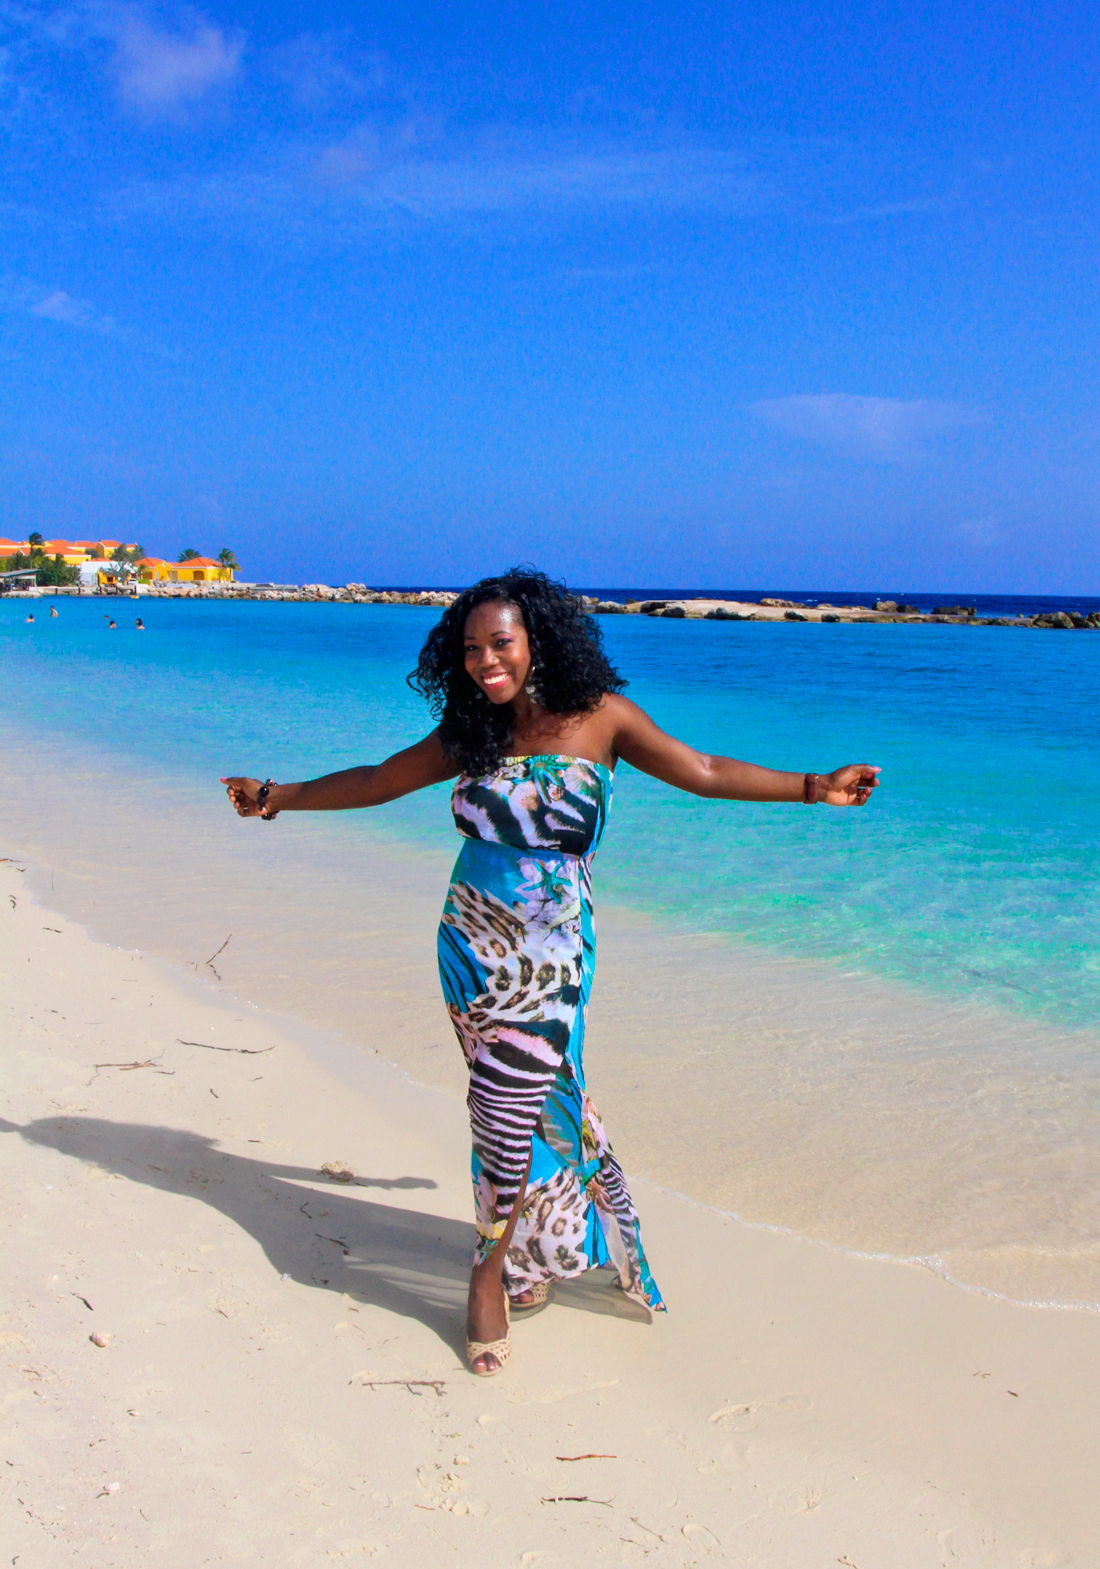 Enjoying beautiful Mambo beach on a solo excursion to the island country of Curacao